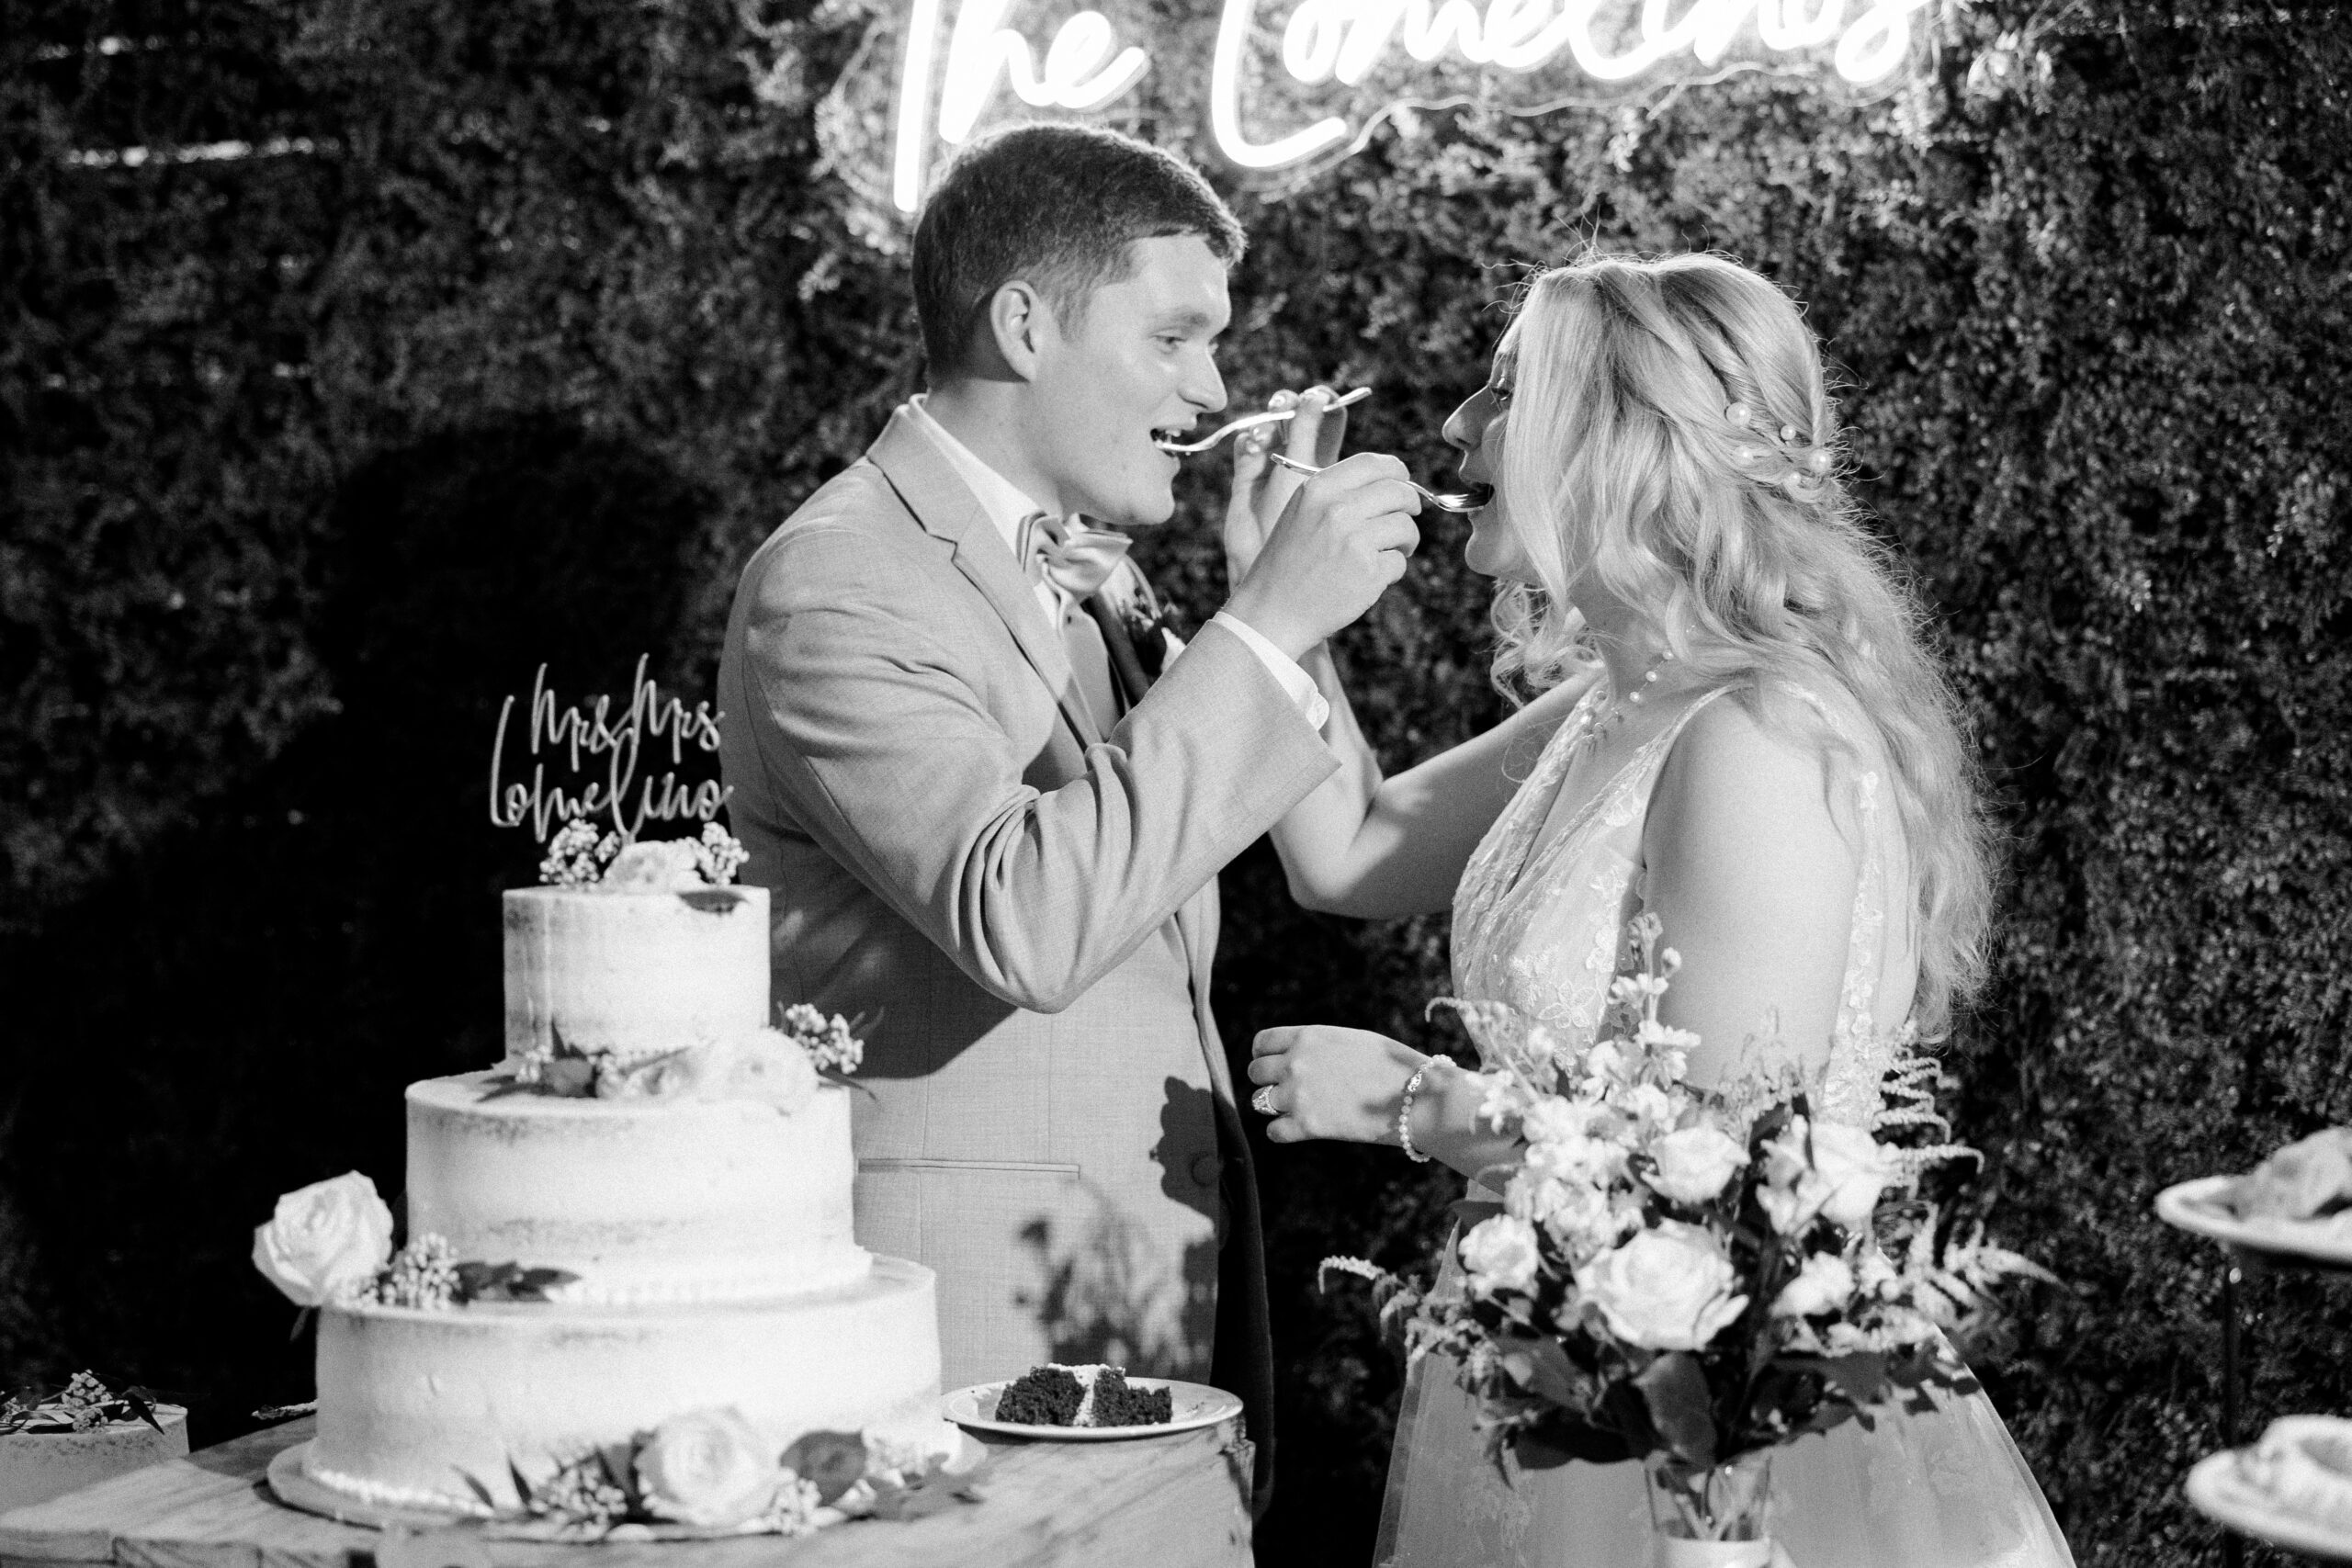 Black and white photo of bride and groom standing next to their cake, feeding each other a bite with forks, light up name sign in background